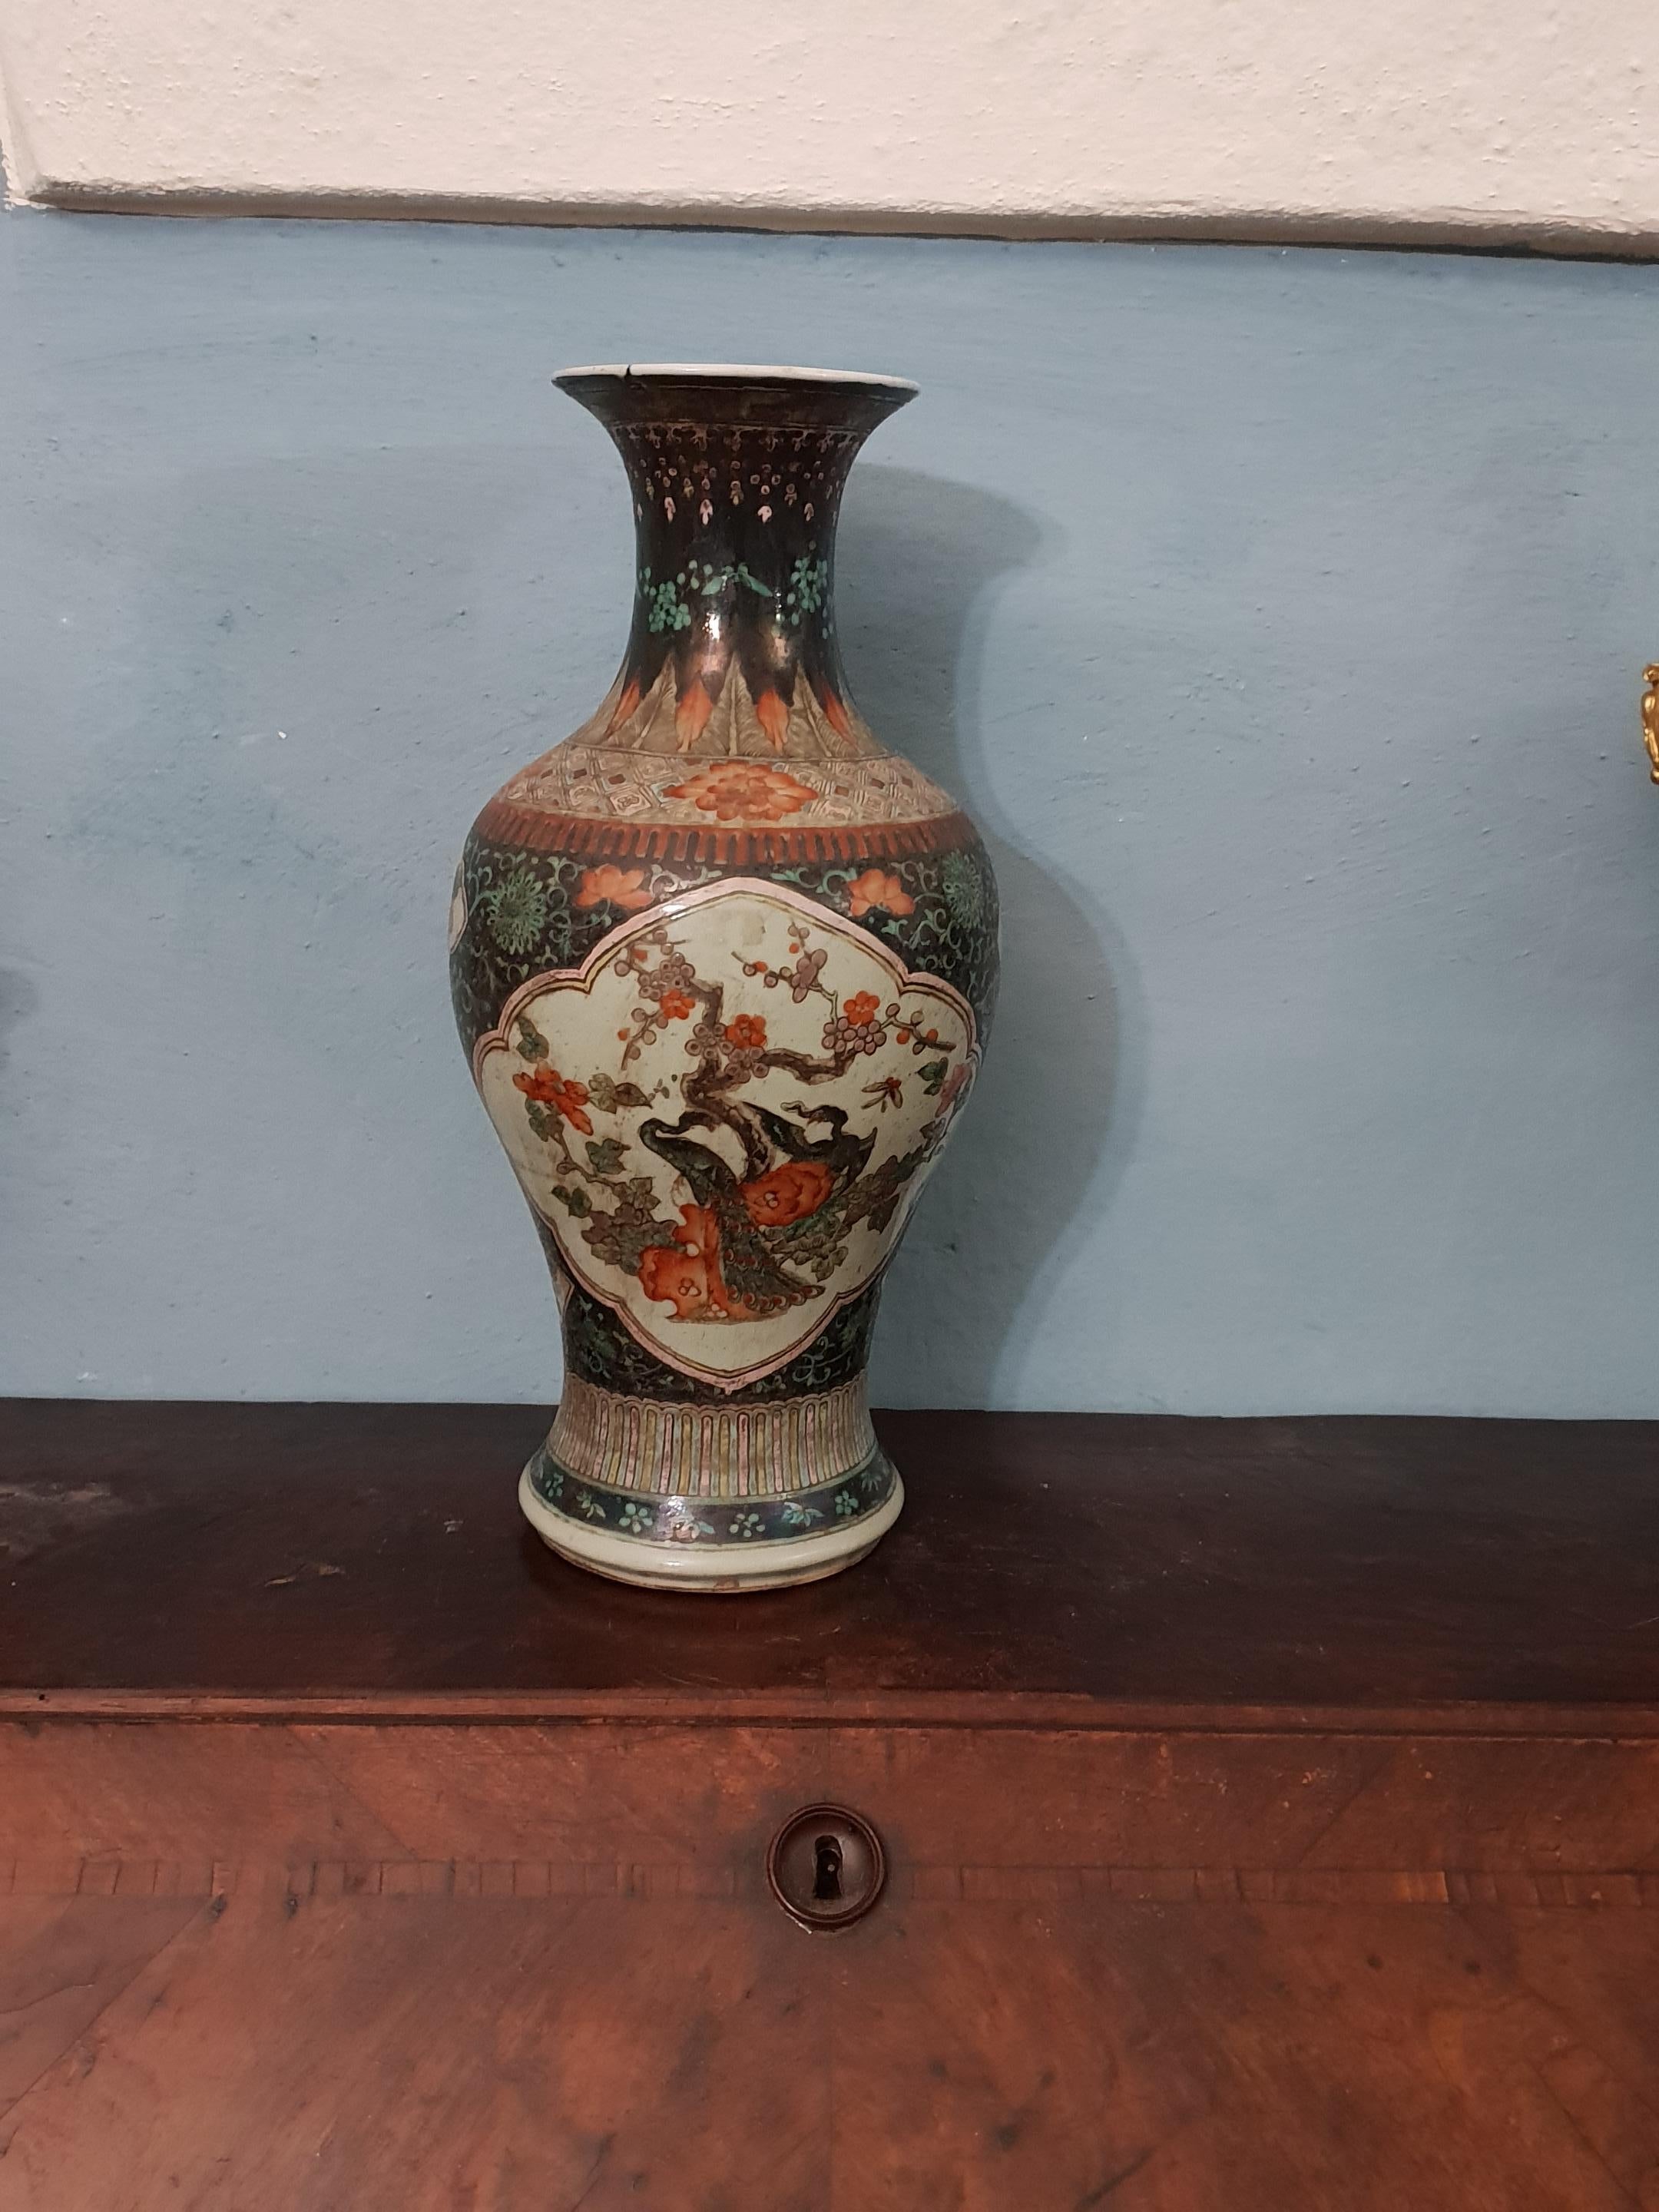 A Chinese black family Porcelain vase decorated with floral and geometrical motifs.